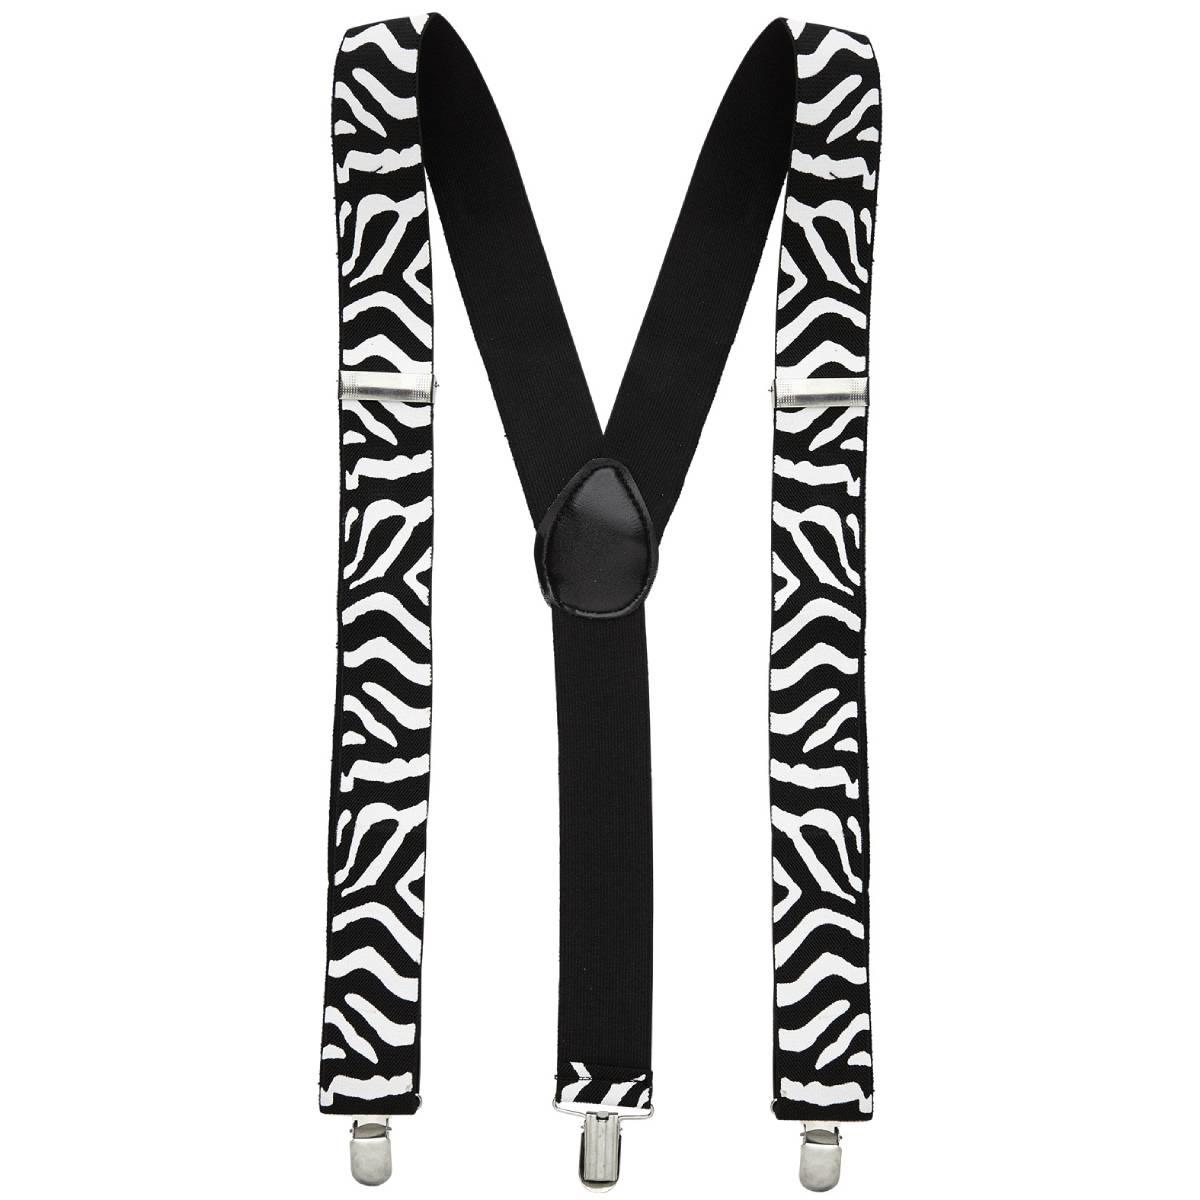 Zebra Print Braces in Black and White by Widmann 8159Z available here at Karnival Costumes online party shop